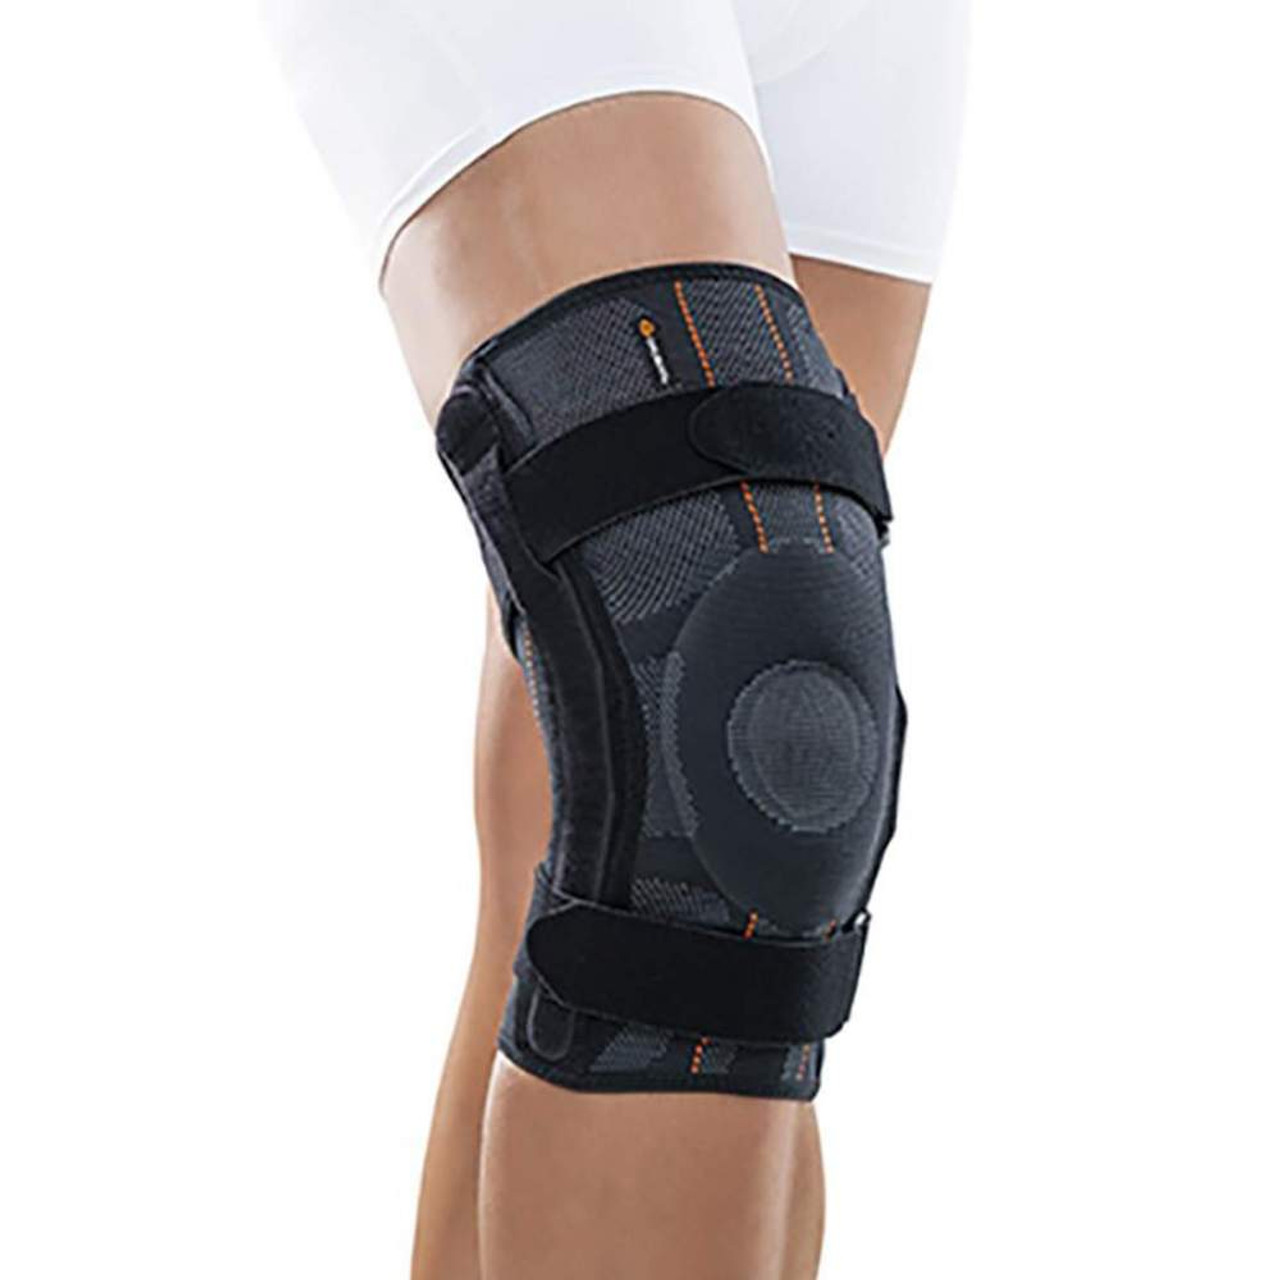 FUNCTIONAL ELASTIC KNEE SUPPORTS w/ JOINTS - XL/5, TGO487-XL